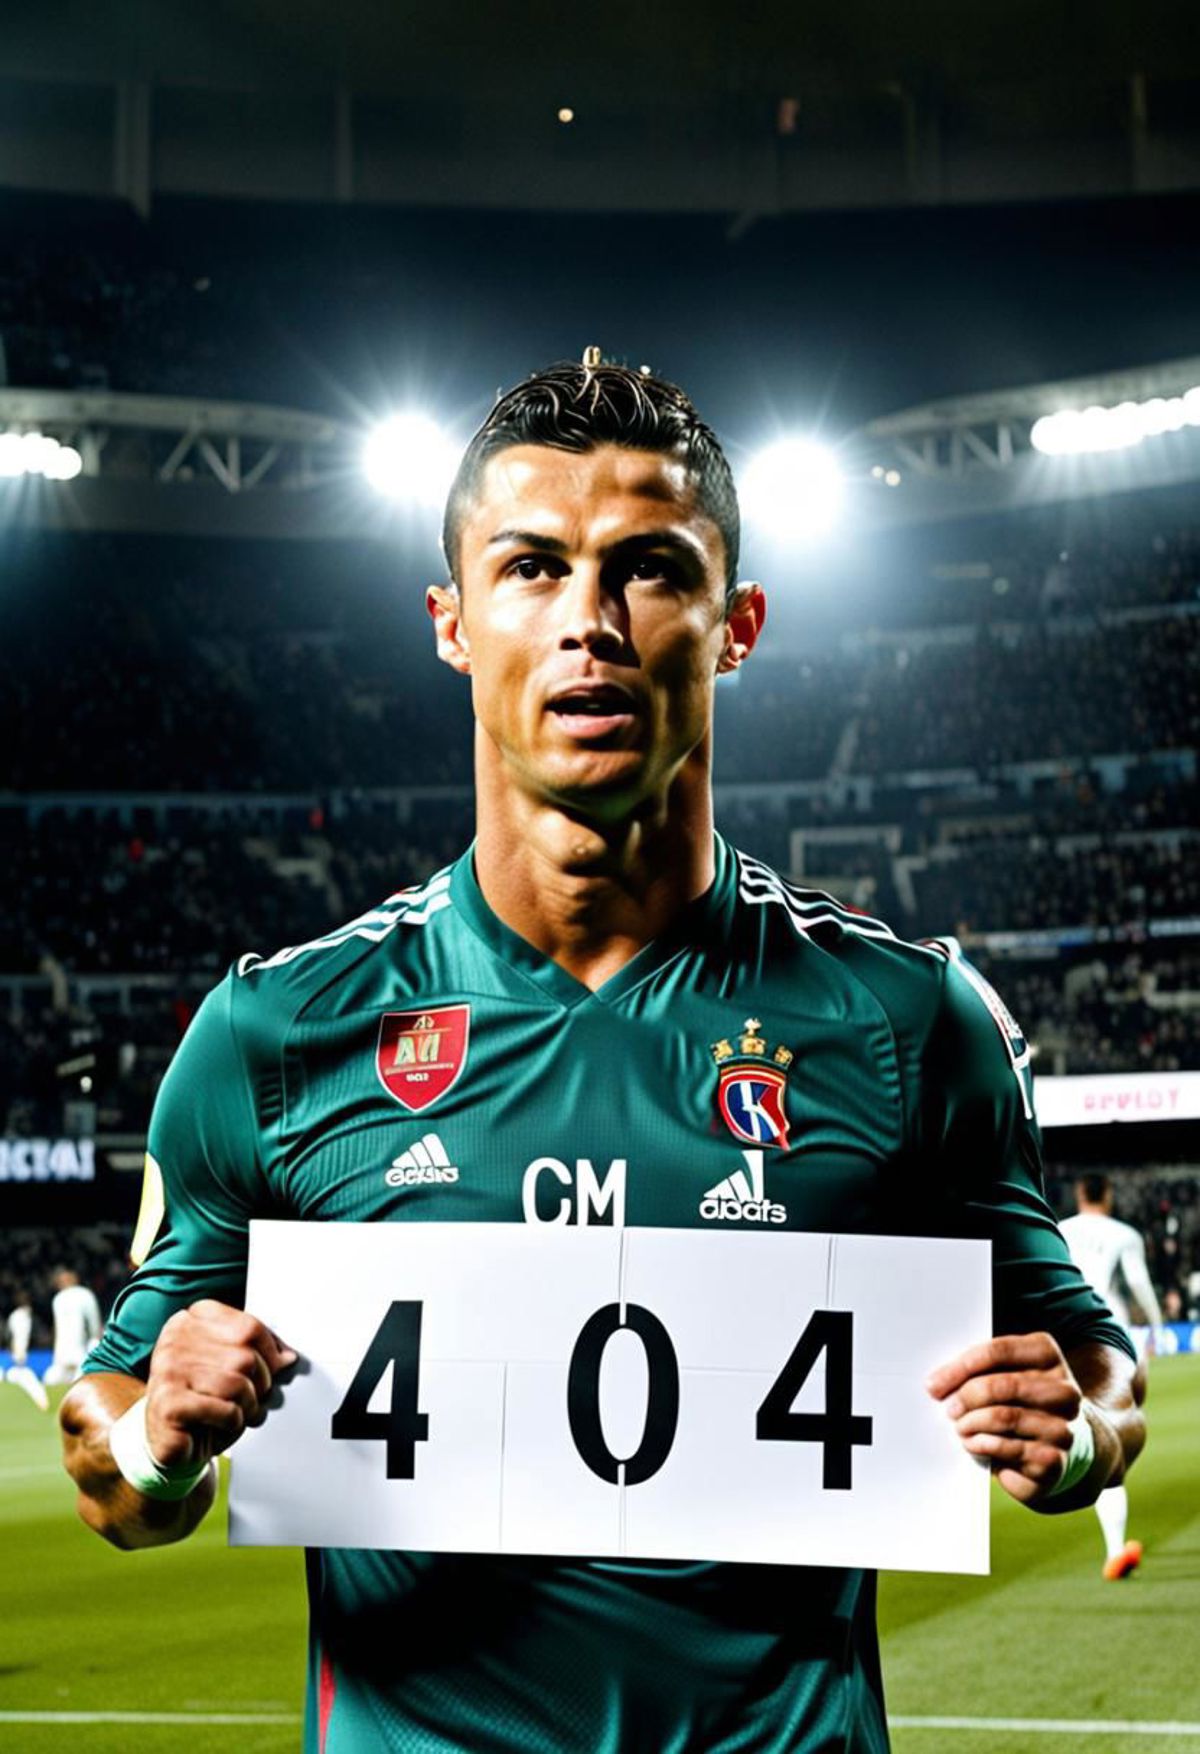 Soccer Player Holding a 401 Sign in Front of a Crowd